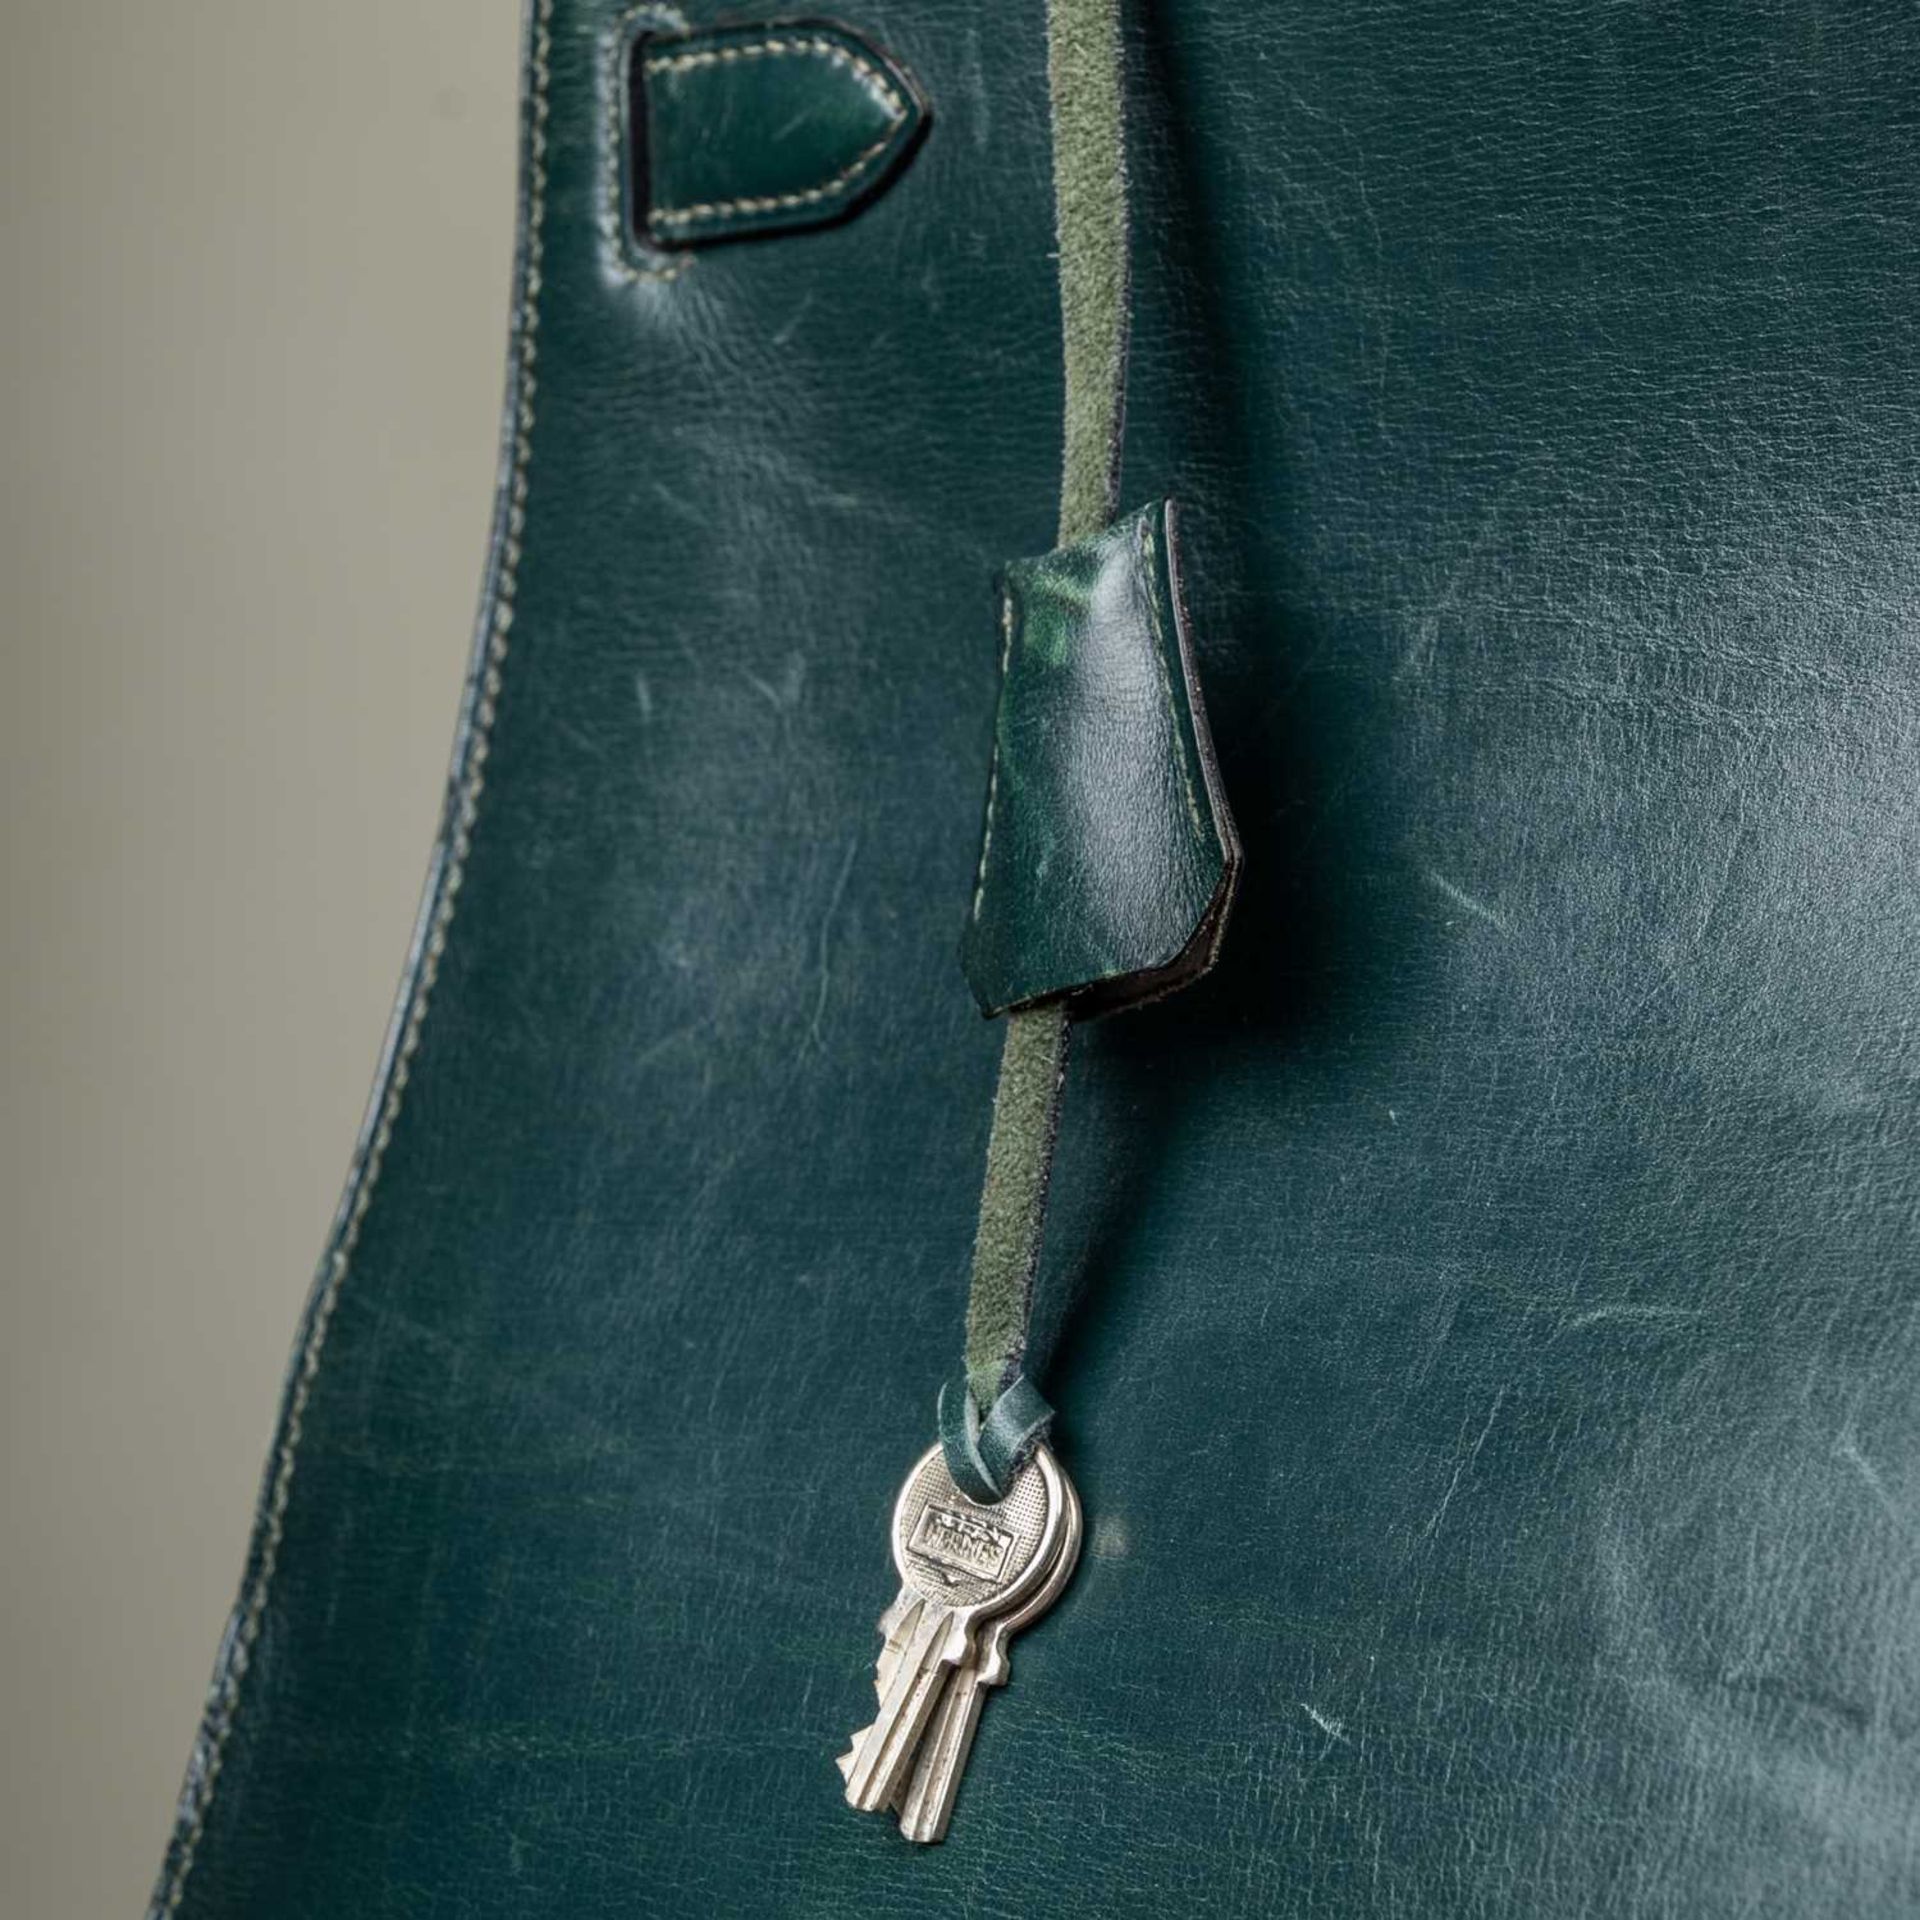 A Hermès 'Kelly' green leather handbag and matching jewellery case, the bag 33cm wide at the base - Image 10 of 18